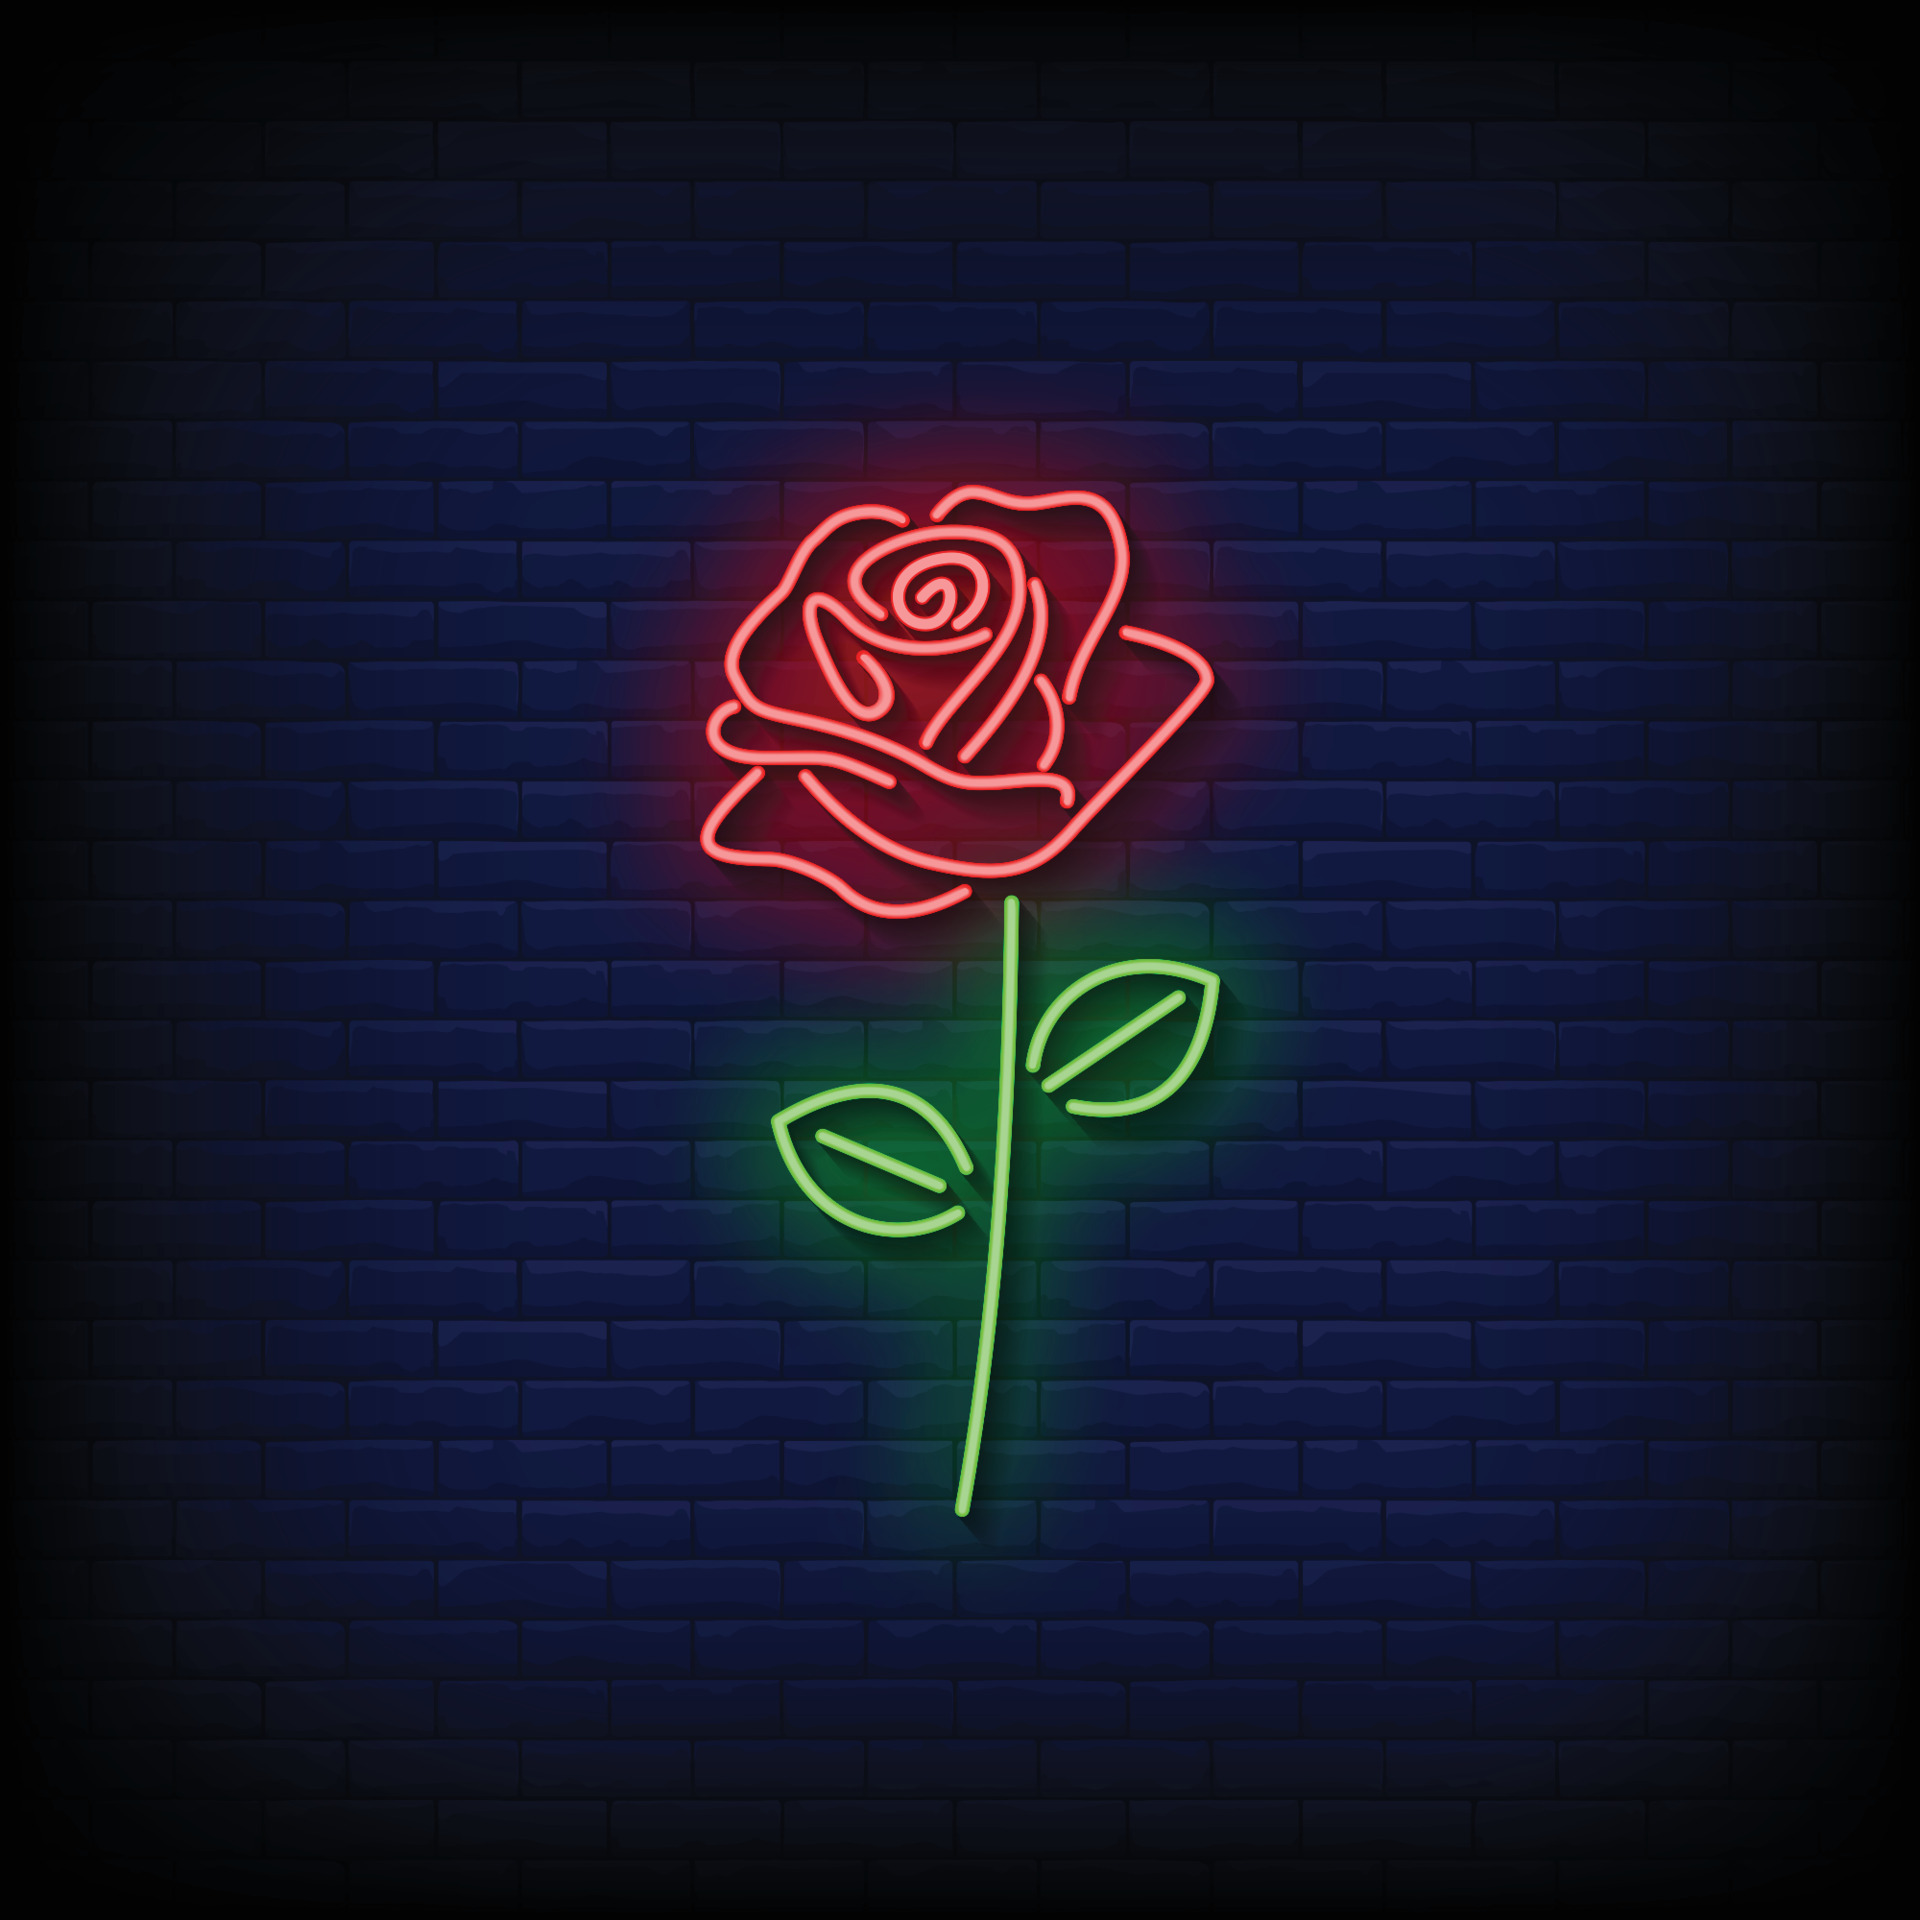 Neon Rose Vector Images (over 3,400)